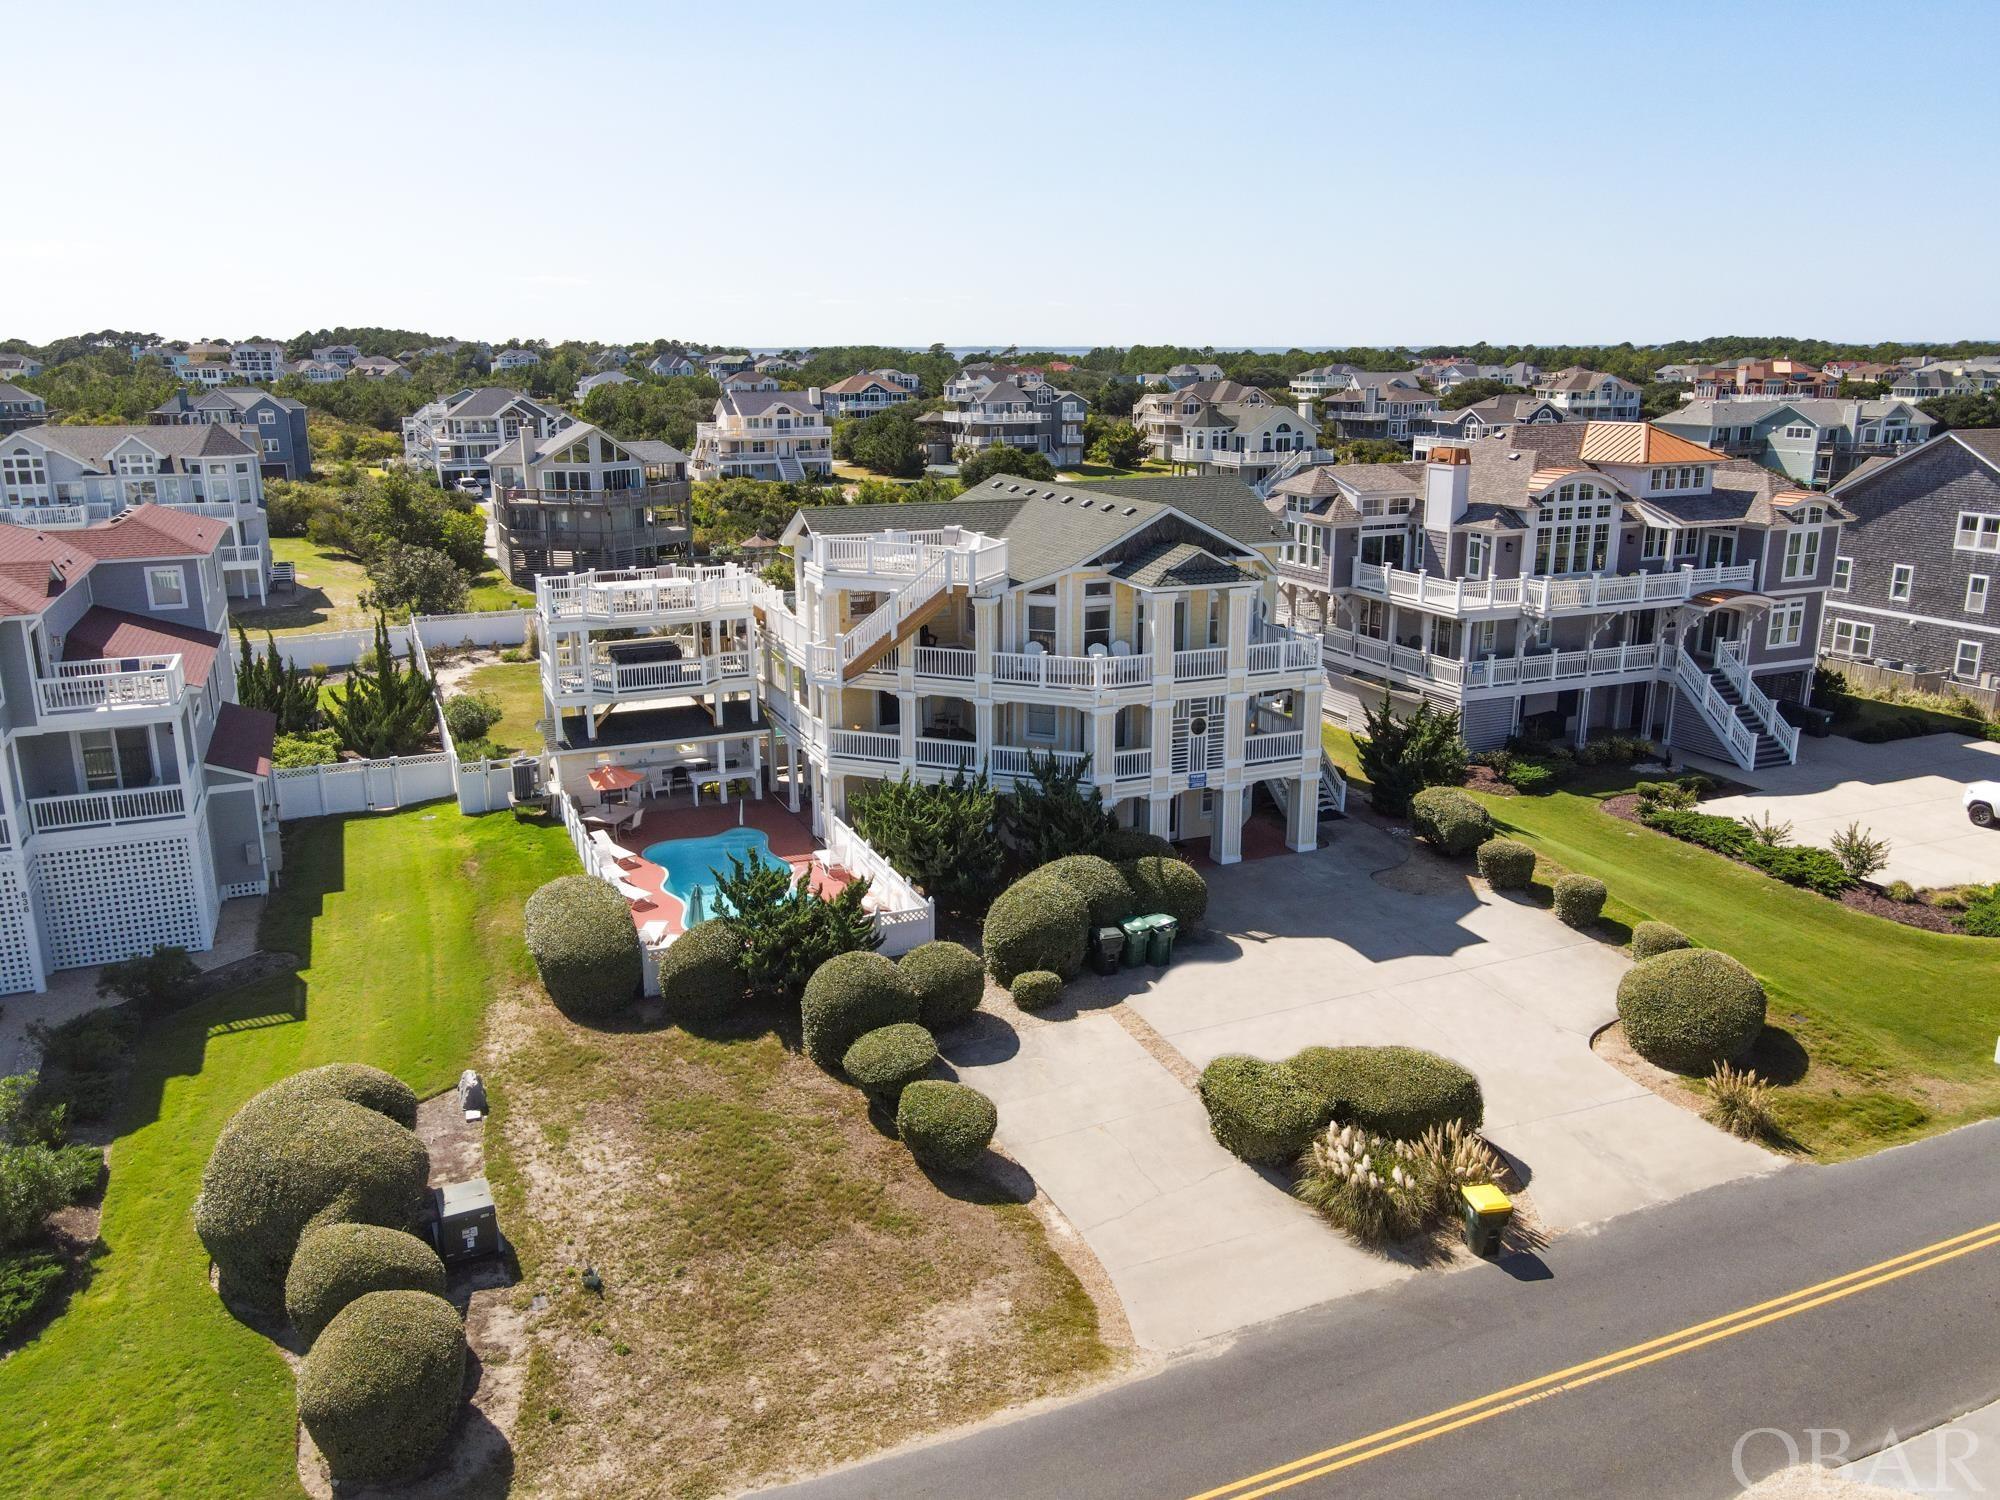 Welcome to “Sunlight,” your dream coastal retreat in the popular Whalehead Community of Corolla with over $200k on the books for 2024. This remarkable semi-oceanfront property boasts an incredible 9 bedrooms and 8 bathrooms, making it the perfect haven for large families and groups seeking the ultimate Outer Banks experience. As you approach this stunning home, you will immediately notice the tasteful upgrades that enhance its curb appeal and functionality. The recently installed new decking on the top deck offers panoramic views of the Atlantic Ocean, allowing you to savor breathtaking sunrises and unwind with the soothing sound of the waves. The northeast side of the home originally had stone siding that was removed and was recently replaced with LP Smart Siding. Set up as a reverse floor plan, on the top level of the home, you will find a great room, with high ceilings and many ocean-facing windows to allow natural light to fill the space. The large kitchen comes equipped with a new cooktop and granite countertops. There is one bedroom on the top level that has new flooring with access to the wrap-around decks. The middle level also has all-new flooring throughout the 5 bedrooms. The ground level comes equipped with a rec room and the remaining three bedrooms. This area flows out seamlessly to the pool area. The pool area is surrounded by 3 levels of decking with a tiki bar on the bottom and a hot tub in the middle. Schedule your showing today and enjoy walking into a summer full of rental income.